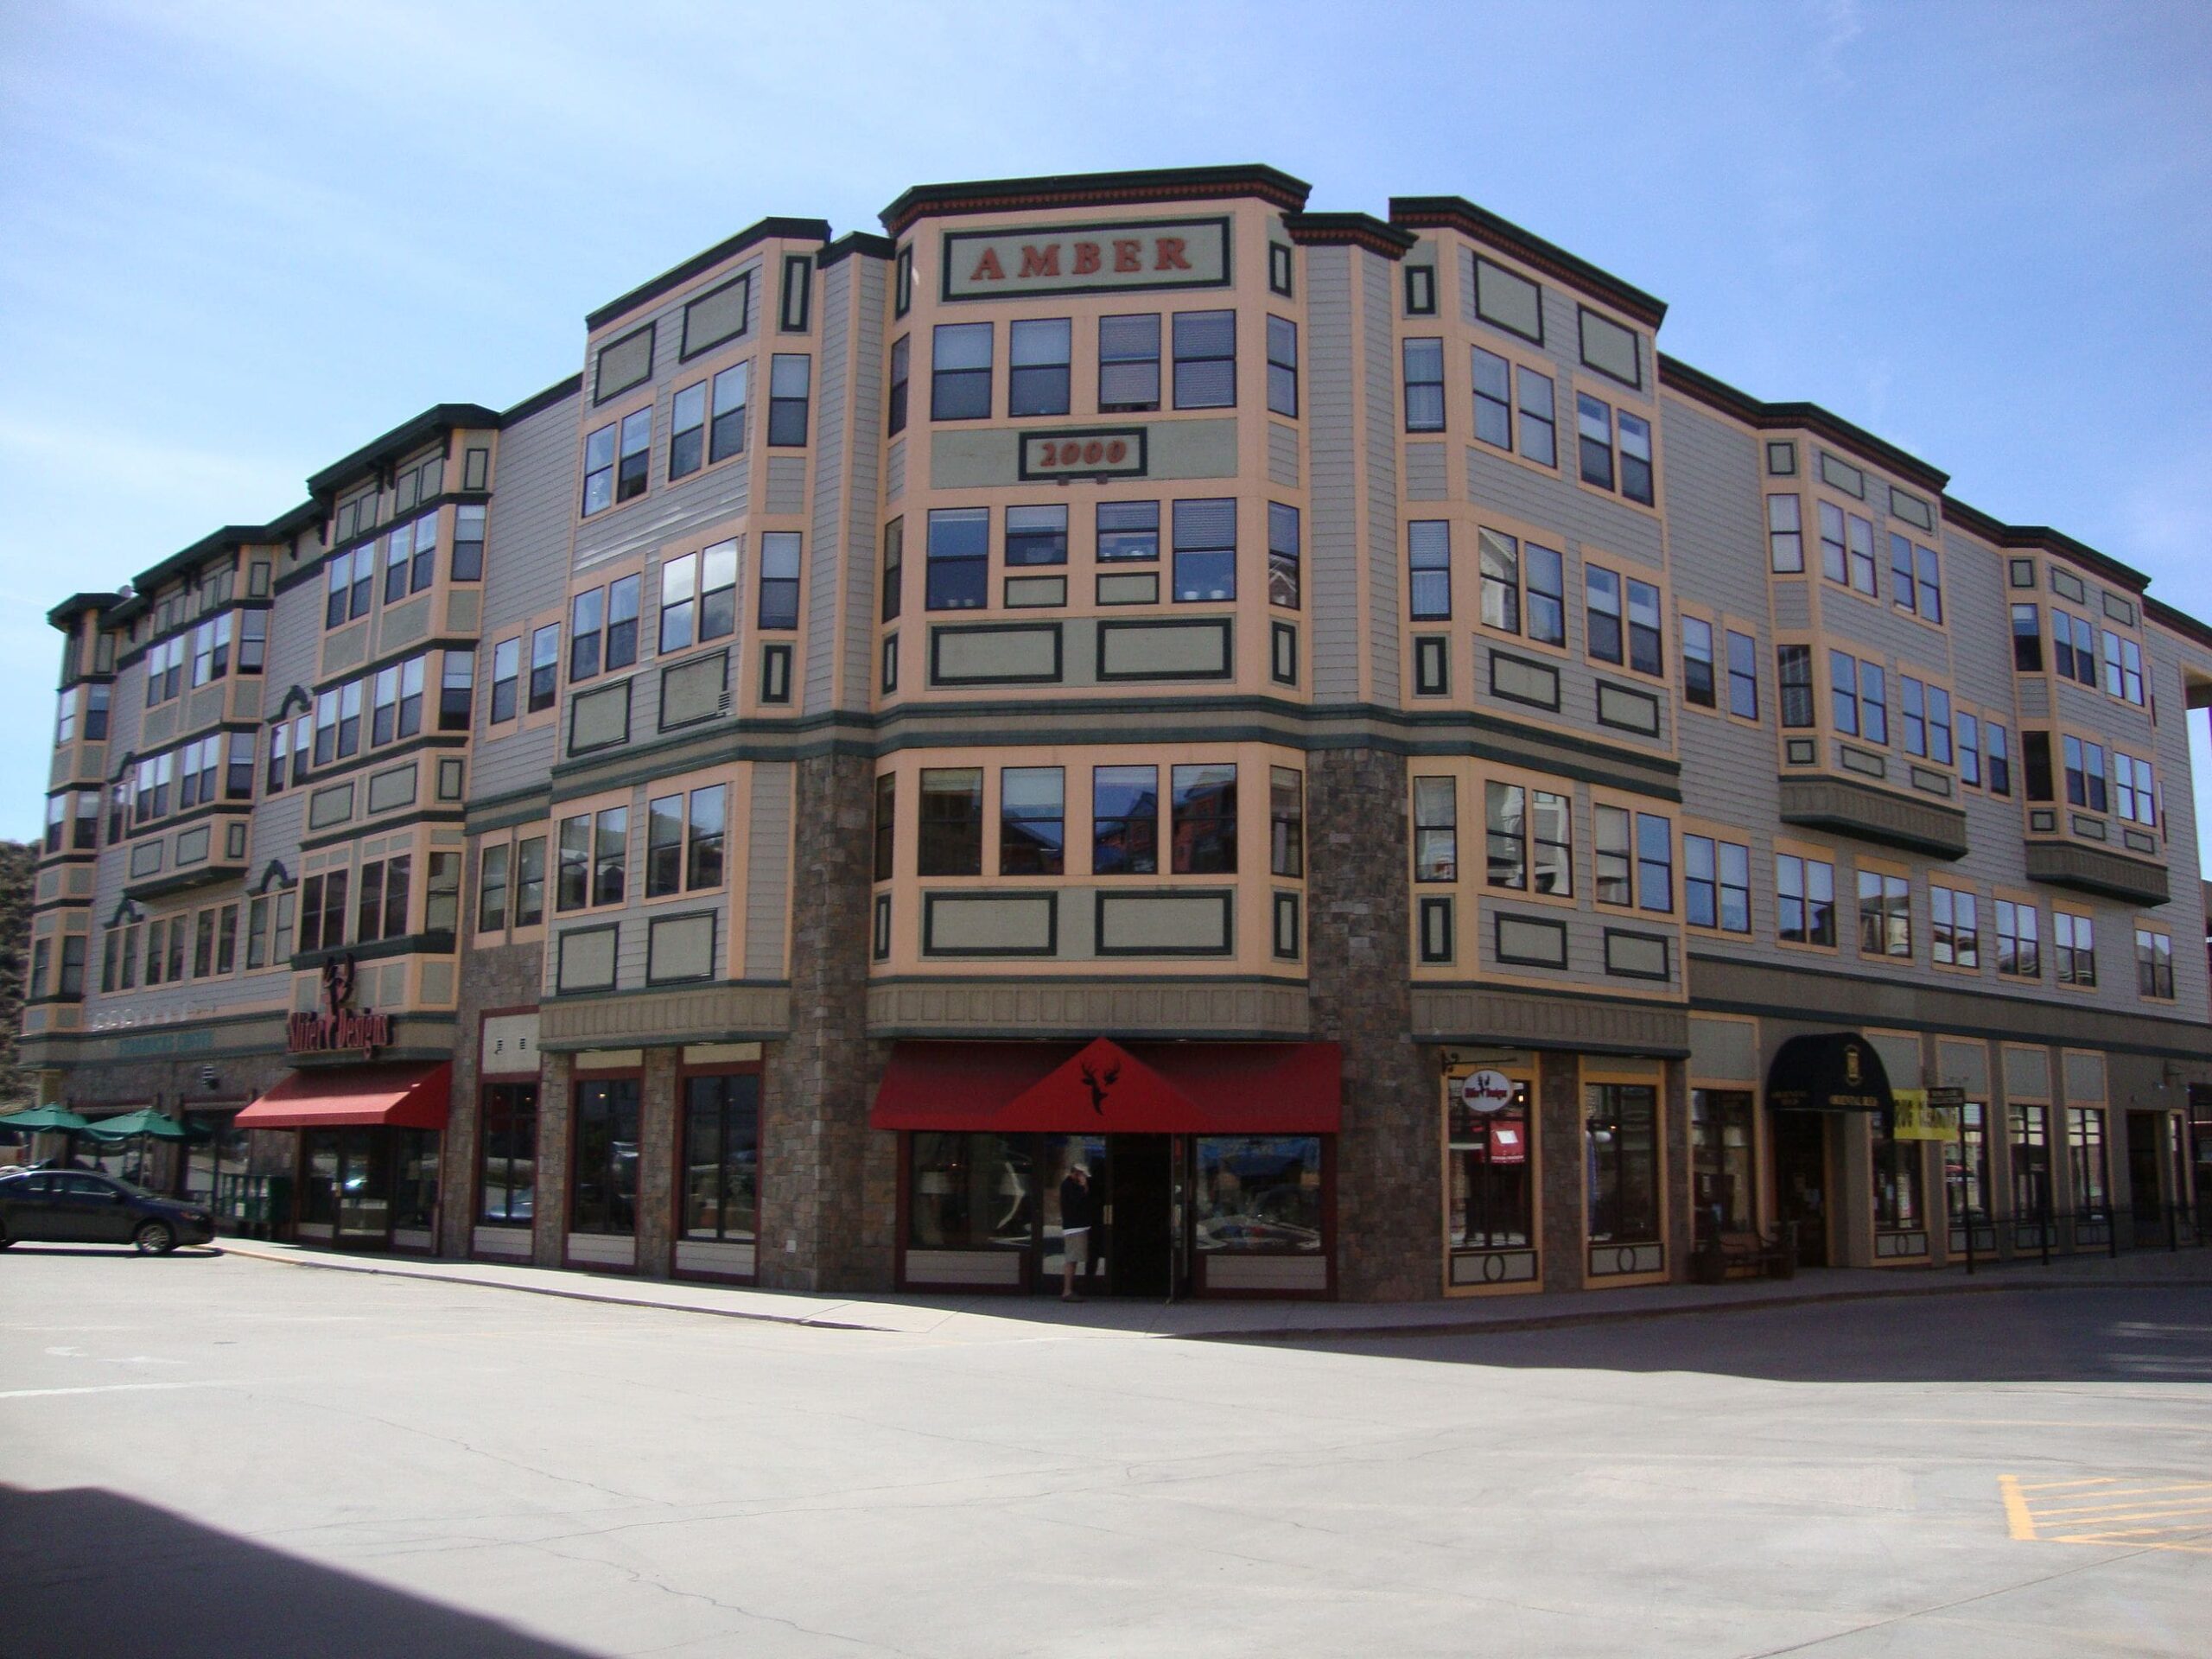 Wide angle view of the Amber Building at Riverwalk at Edwards, Colorado.